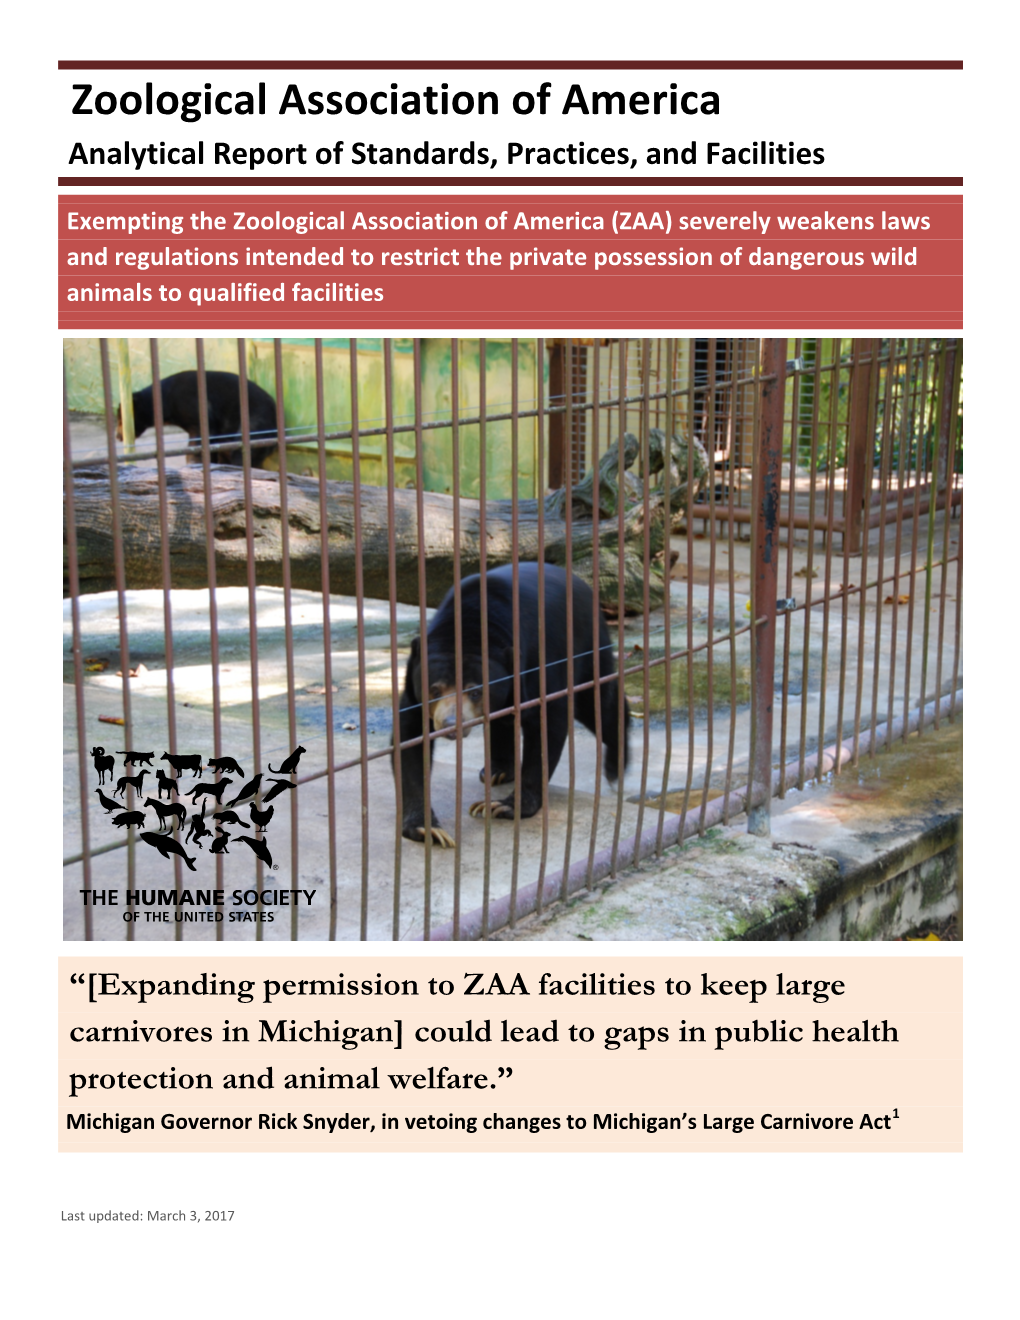 Exempting the Zoological Association of America (ZAA)